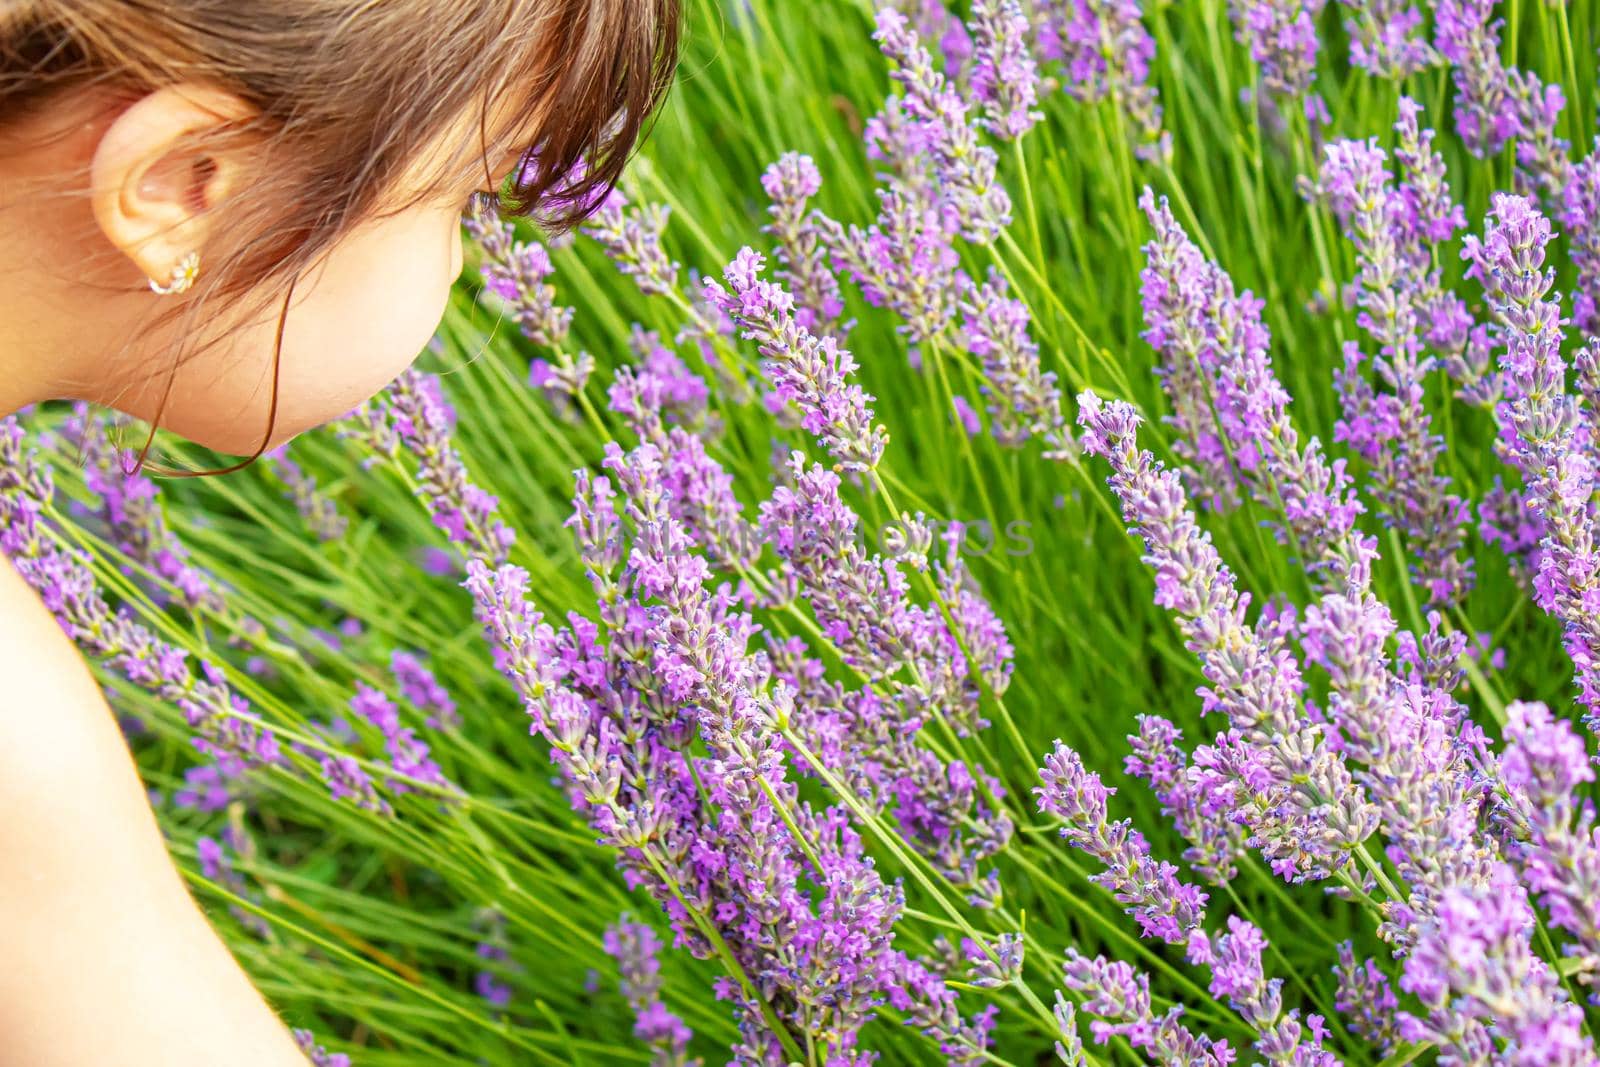 Girl in a flowering field of lavender. Selective focus. nature.